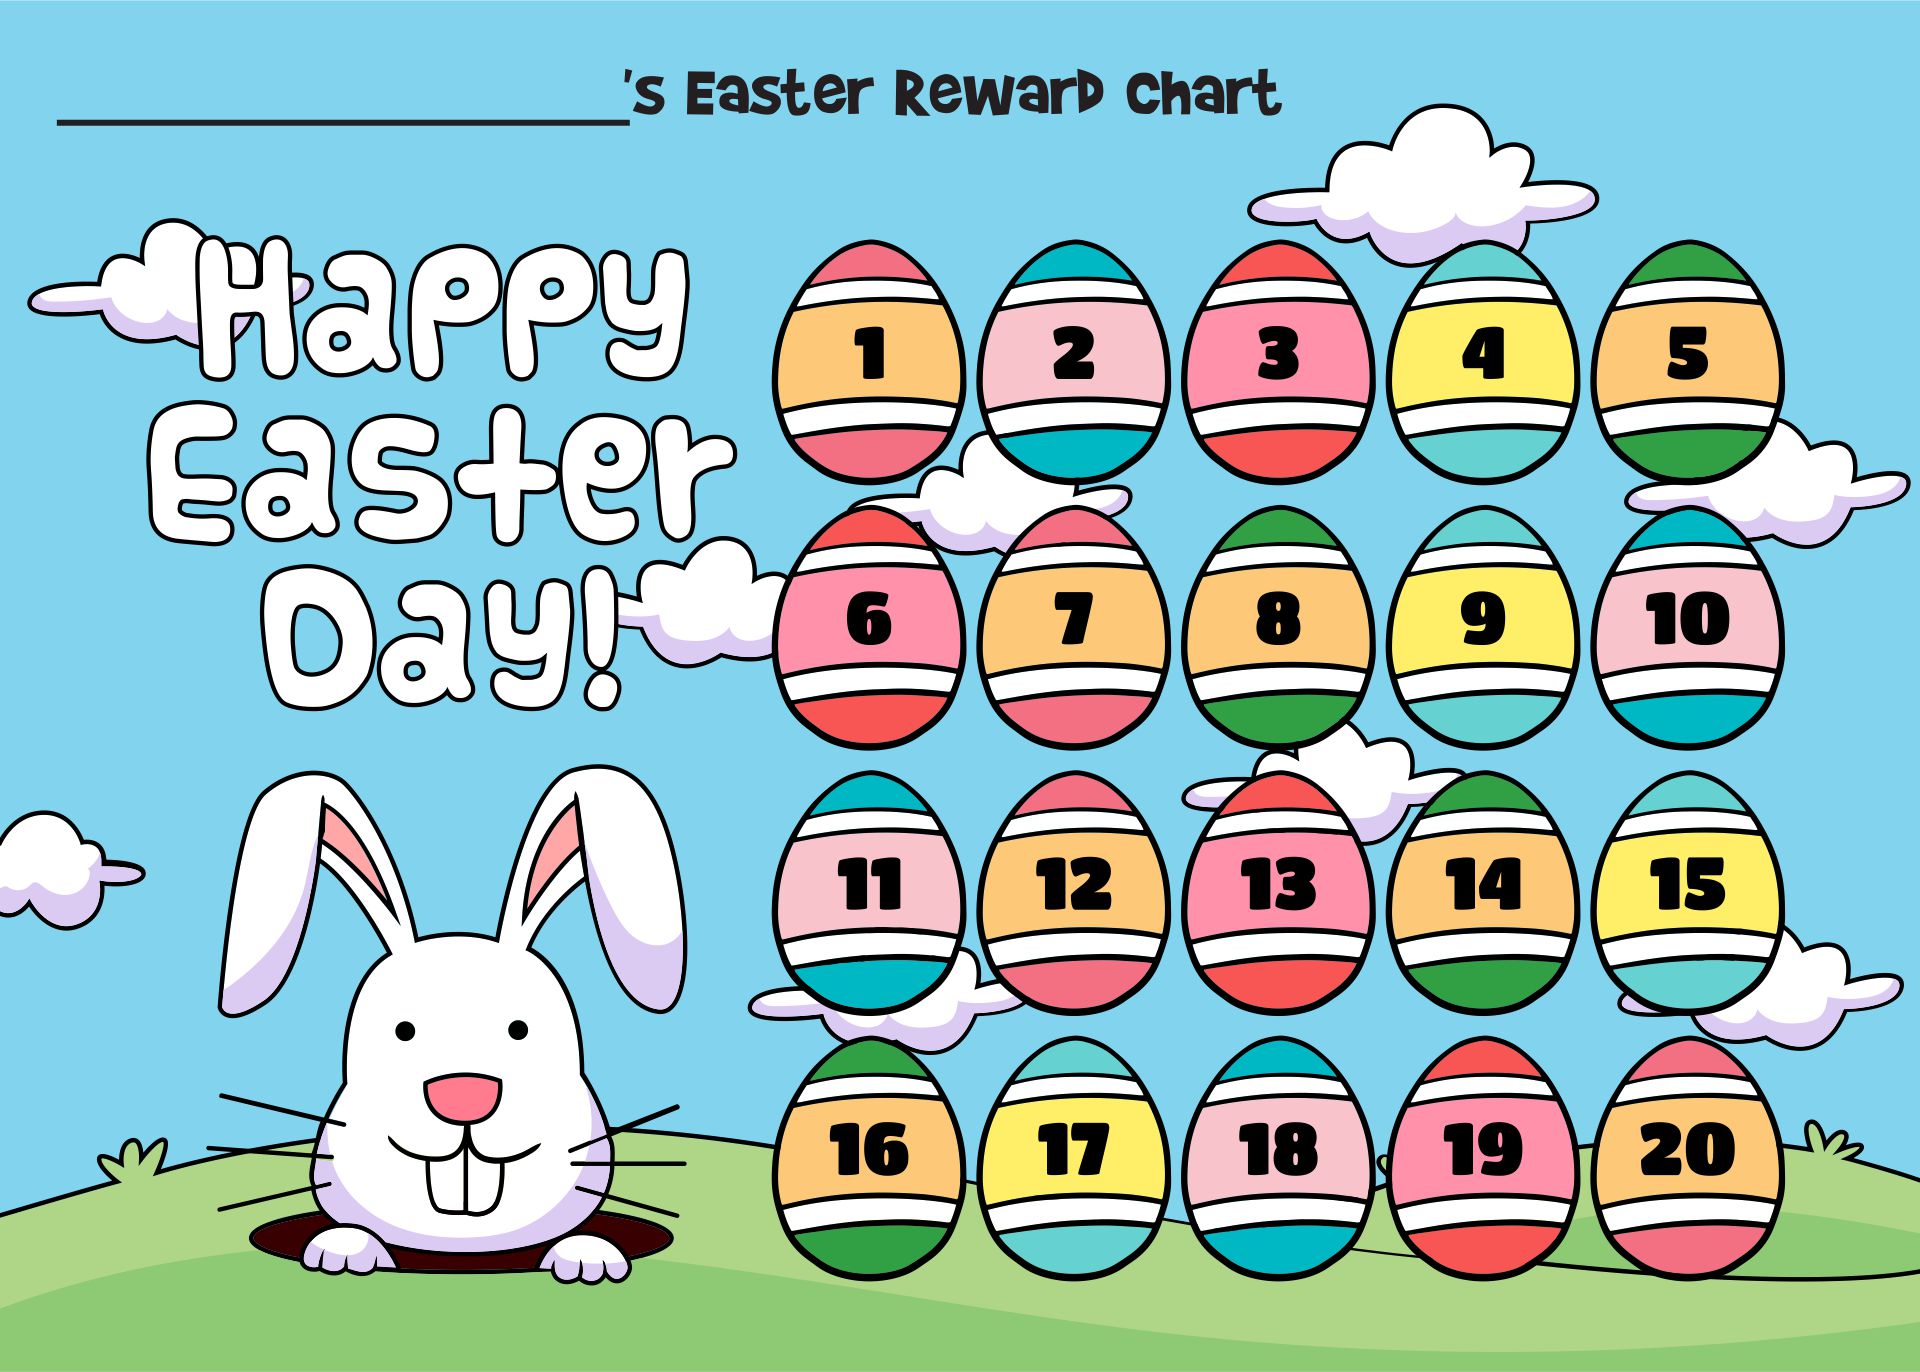 Easter Bunny Eggs Charts